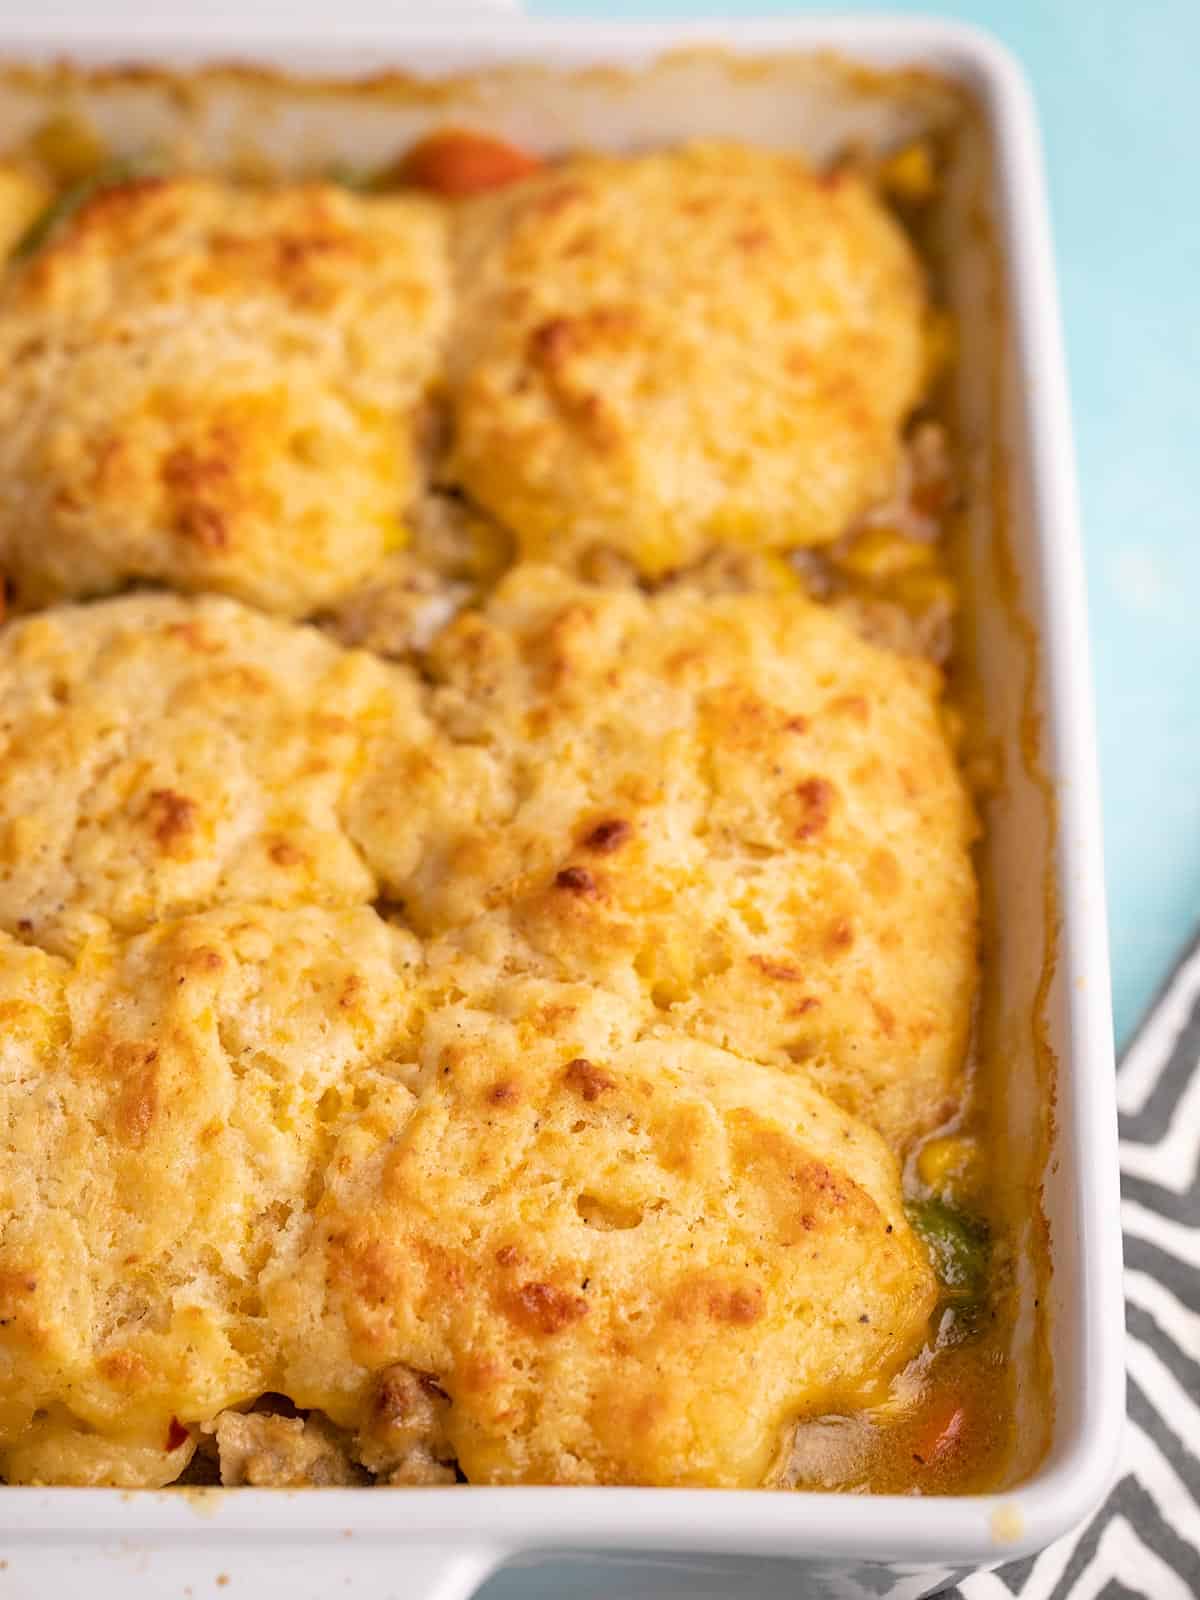 Side view of cooked chicken and biscuit casserole in a white casserole dish.